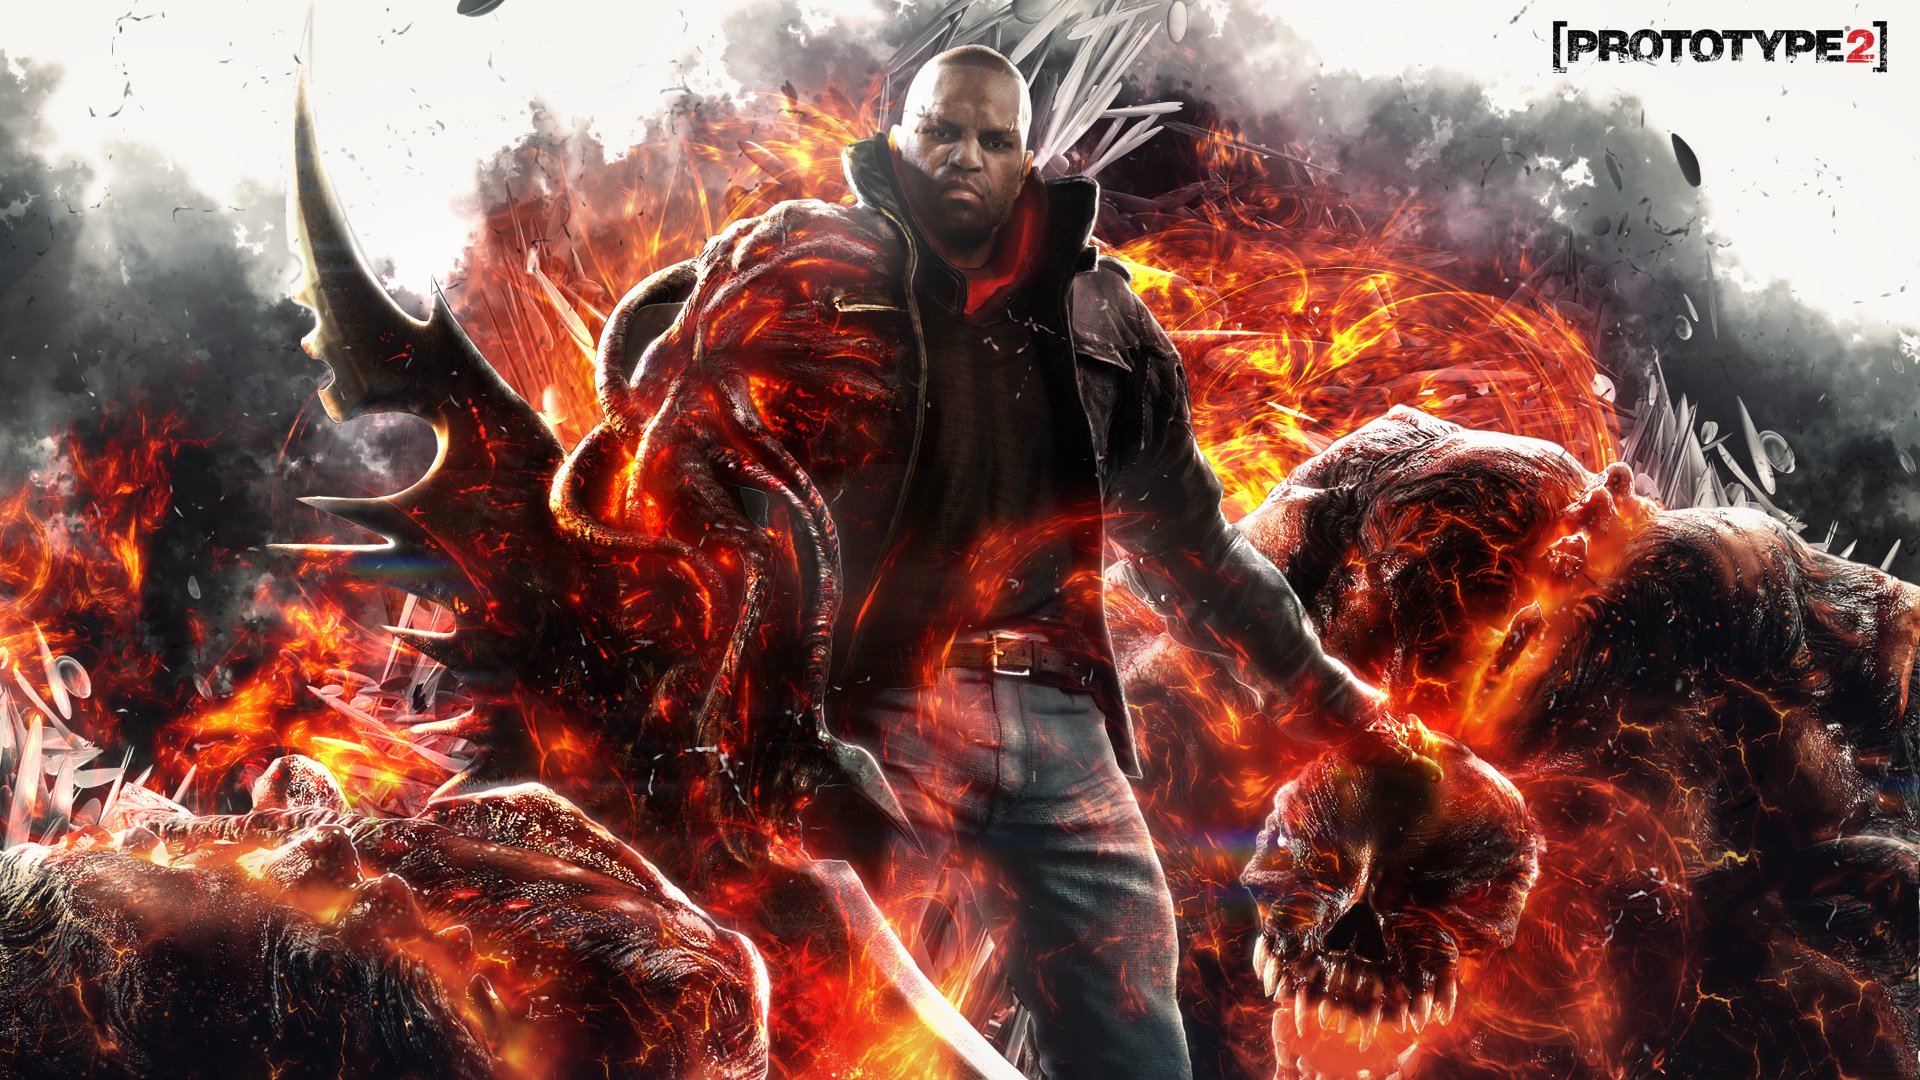 Amazing Prototype 2: The Anchor Pictures & Backgrounds